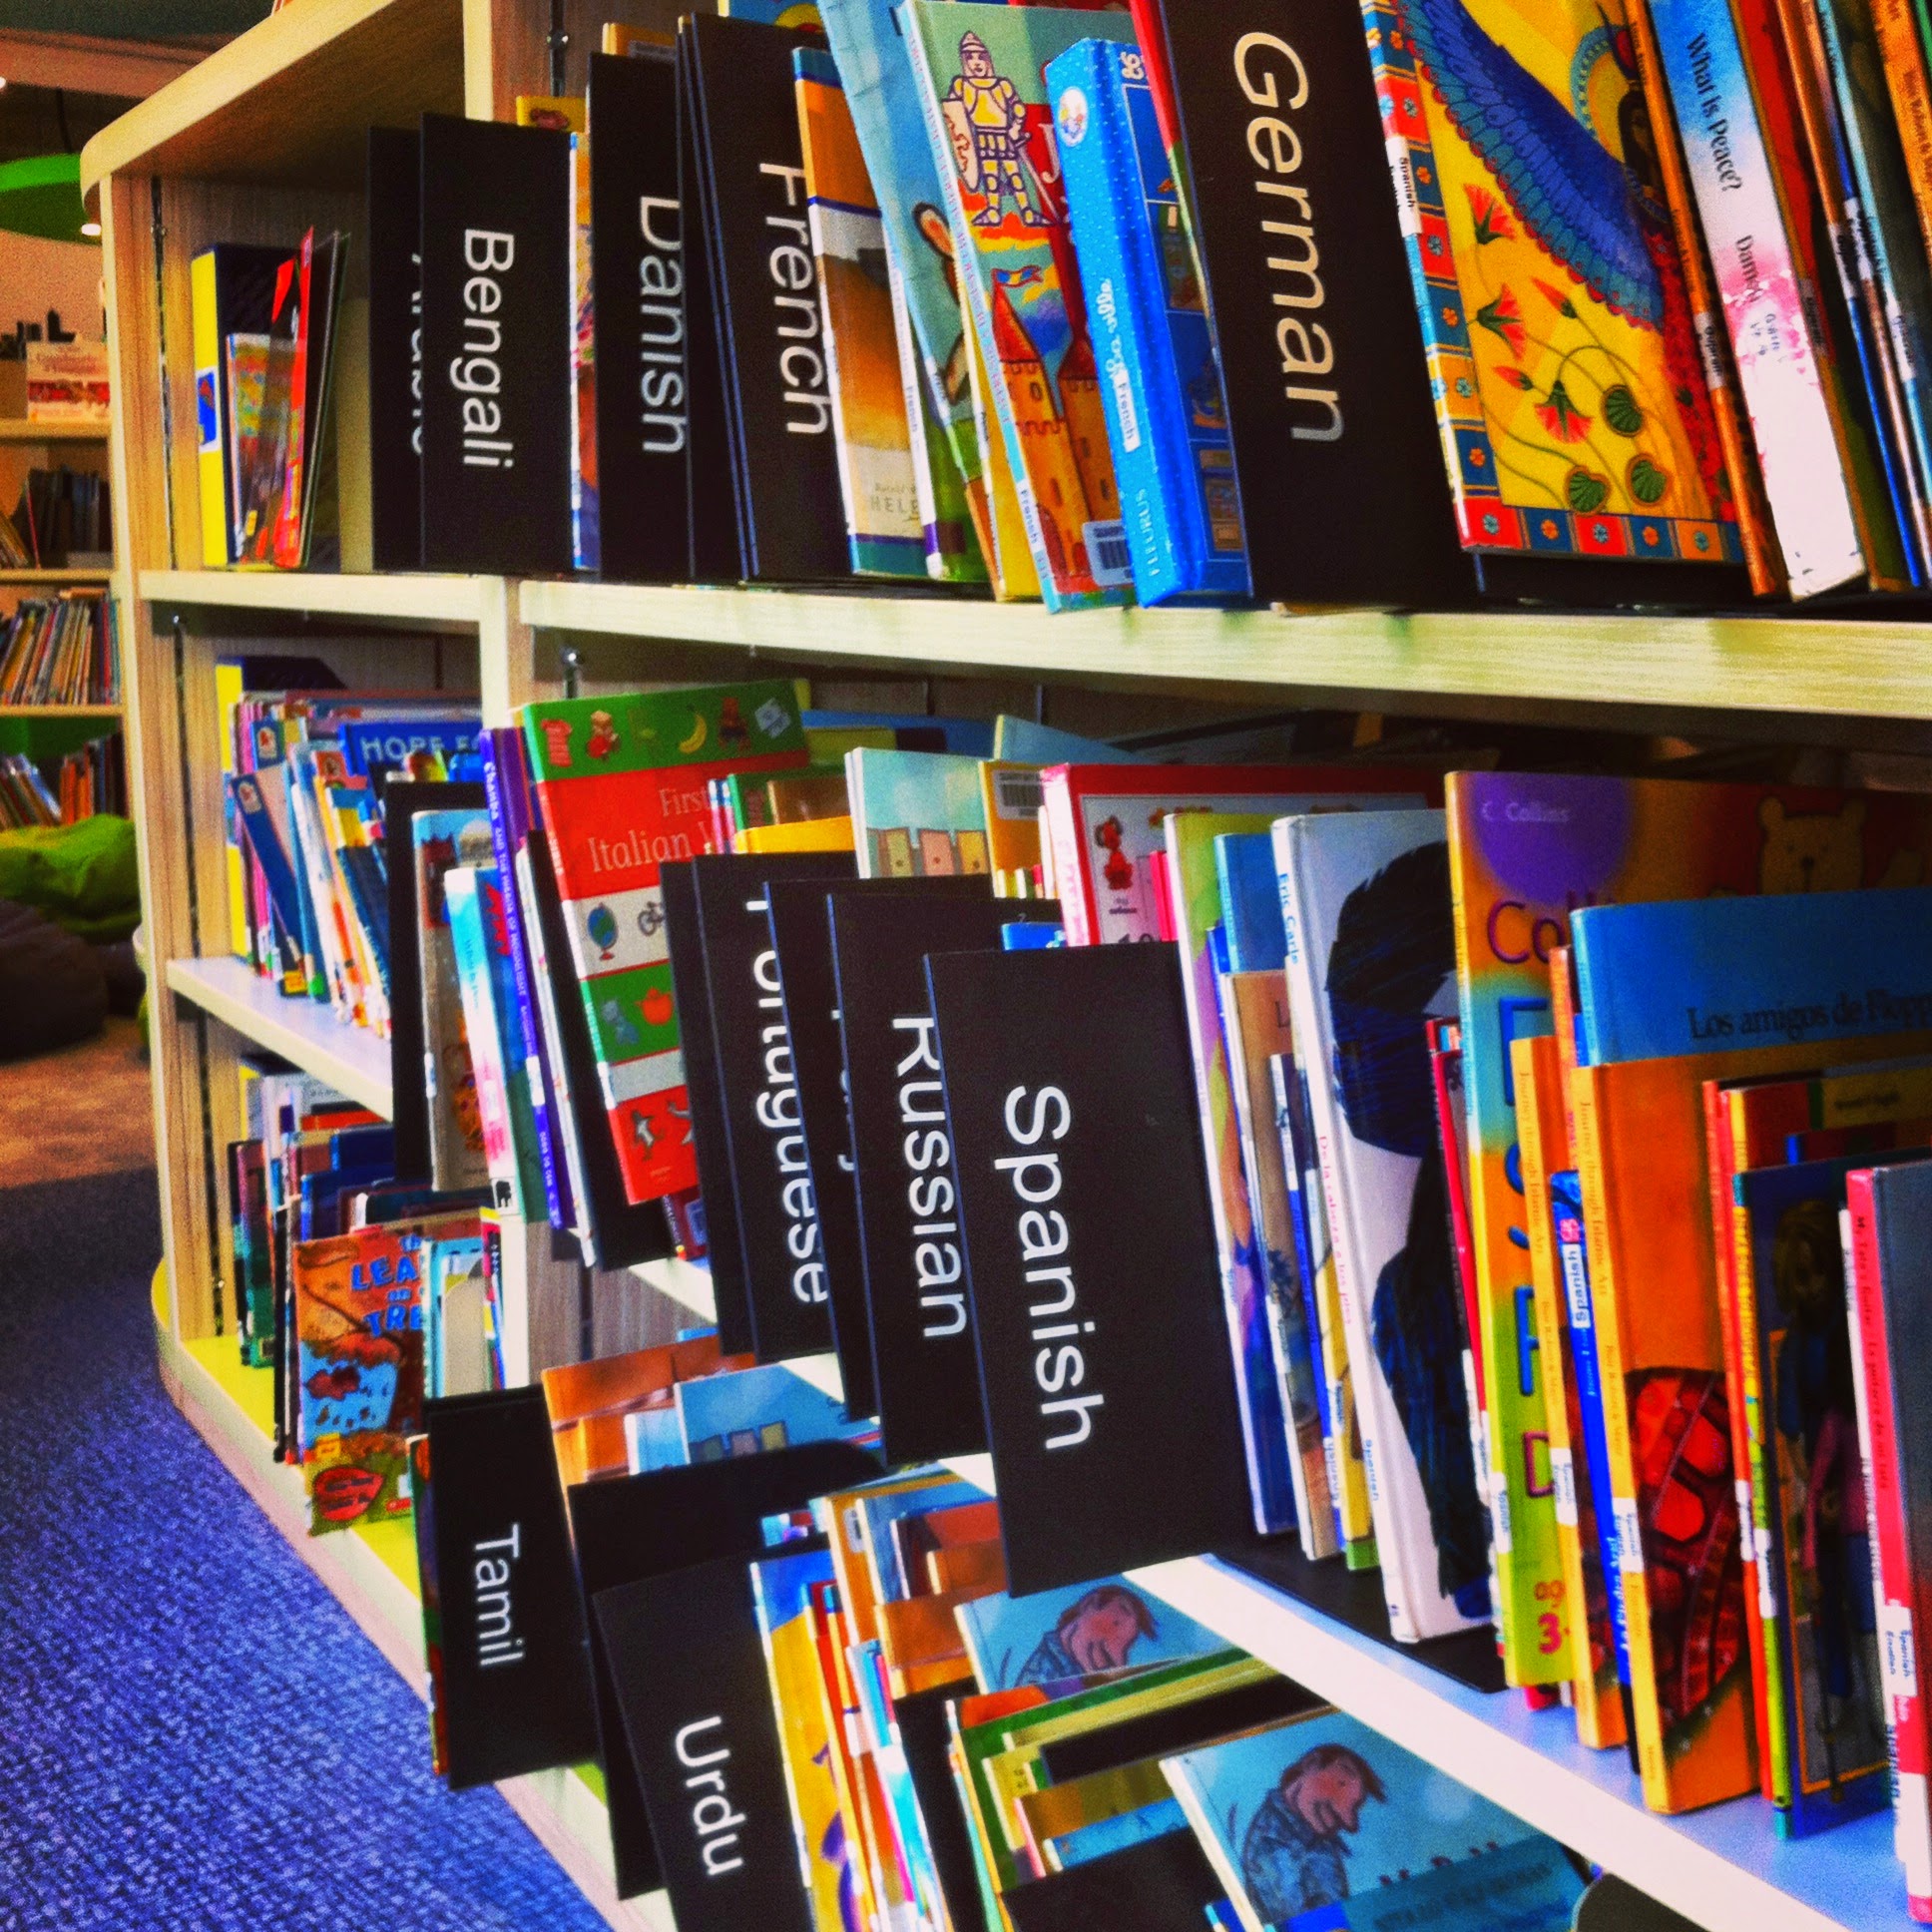 Saving for College and Retirement: Starting with these primary school language books